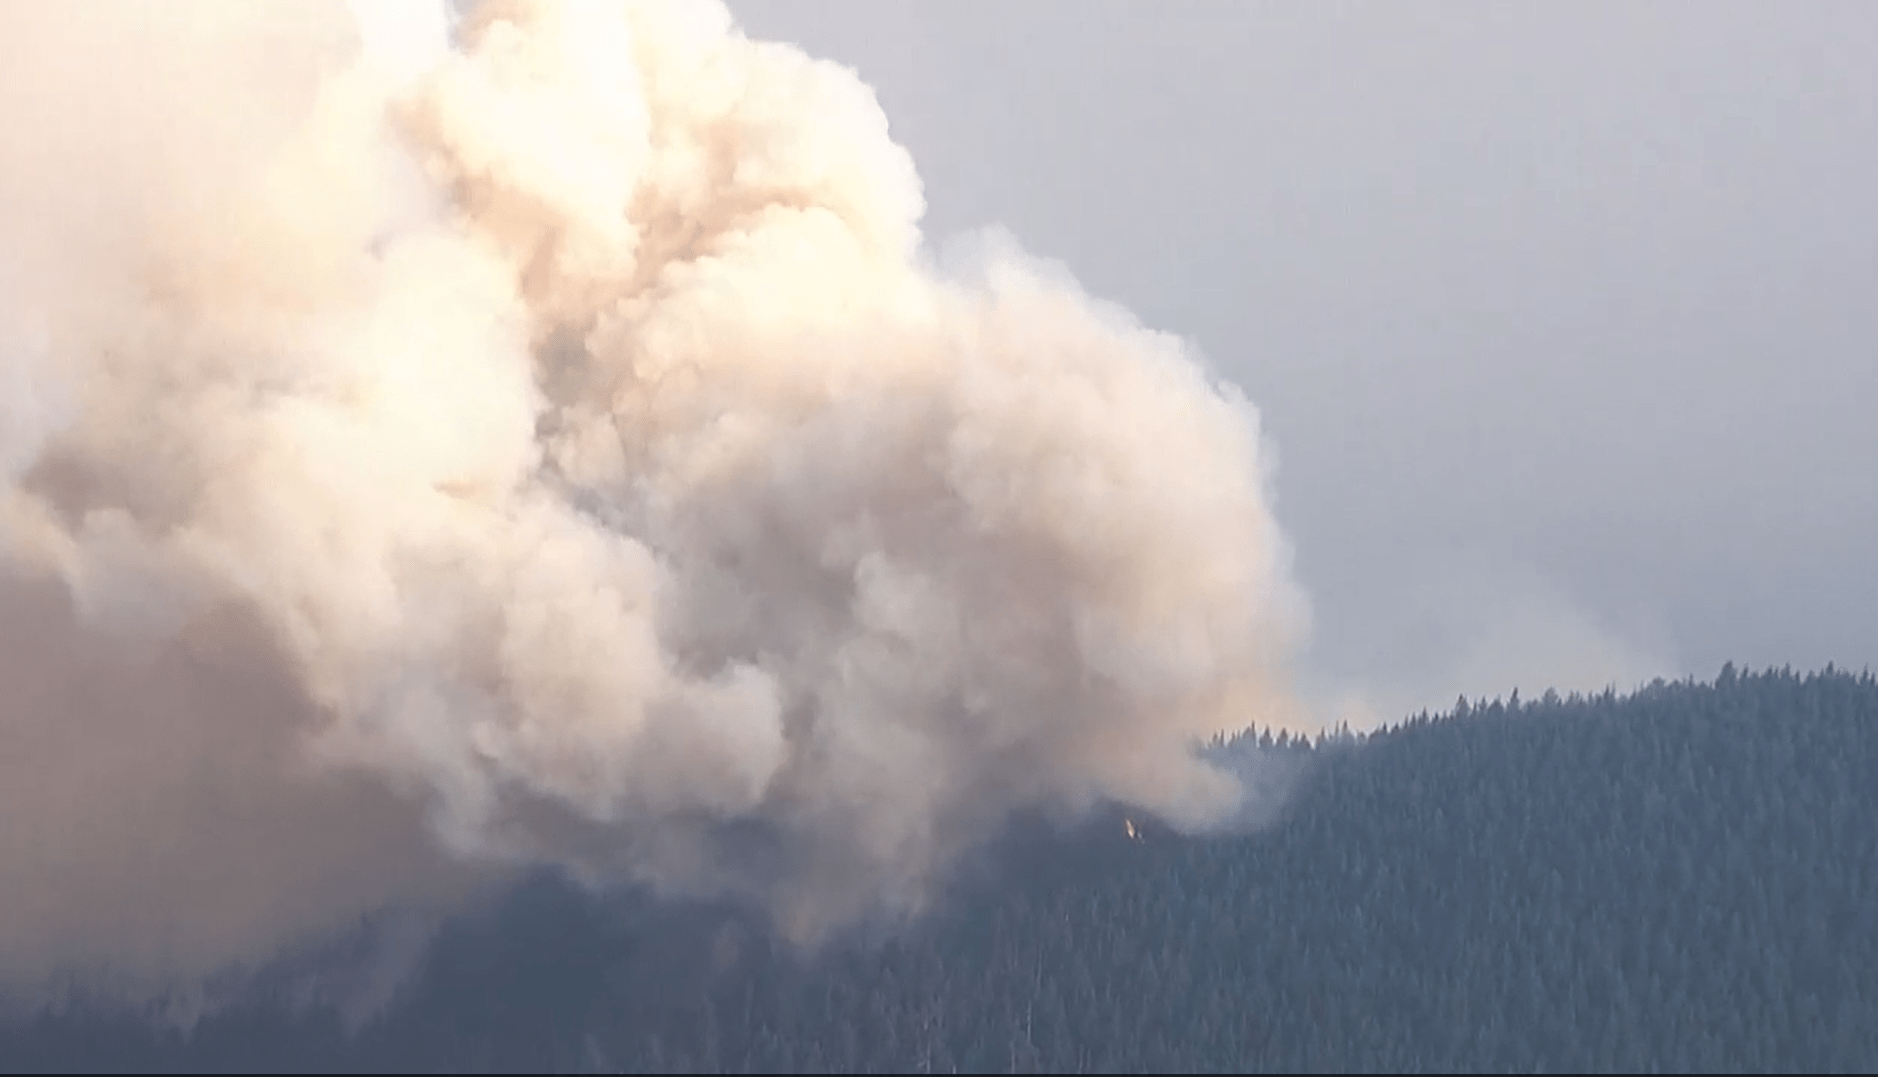 A view from a KPTV helicopter shows the Big Hollow Fire burning on a ridge in the Gifford Pinchot National Forest near Yale Reservoir.